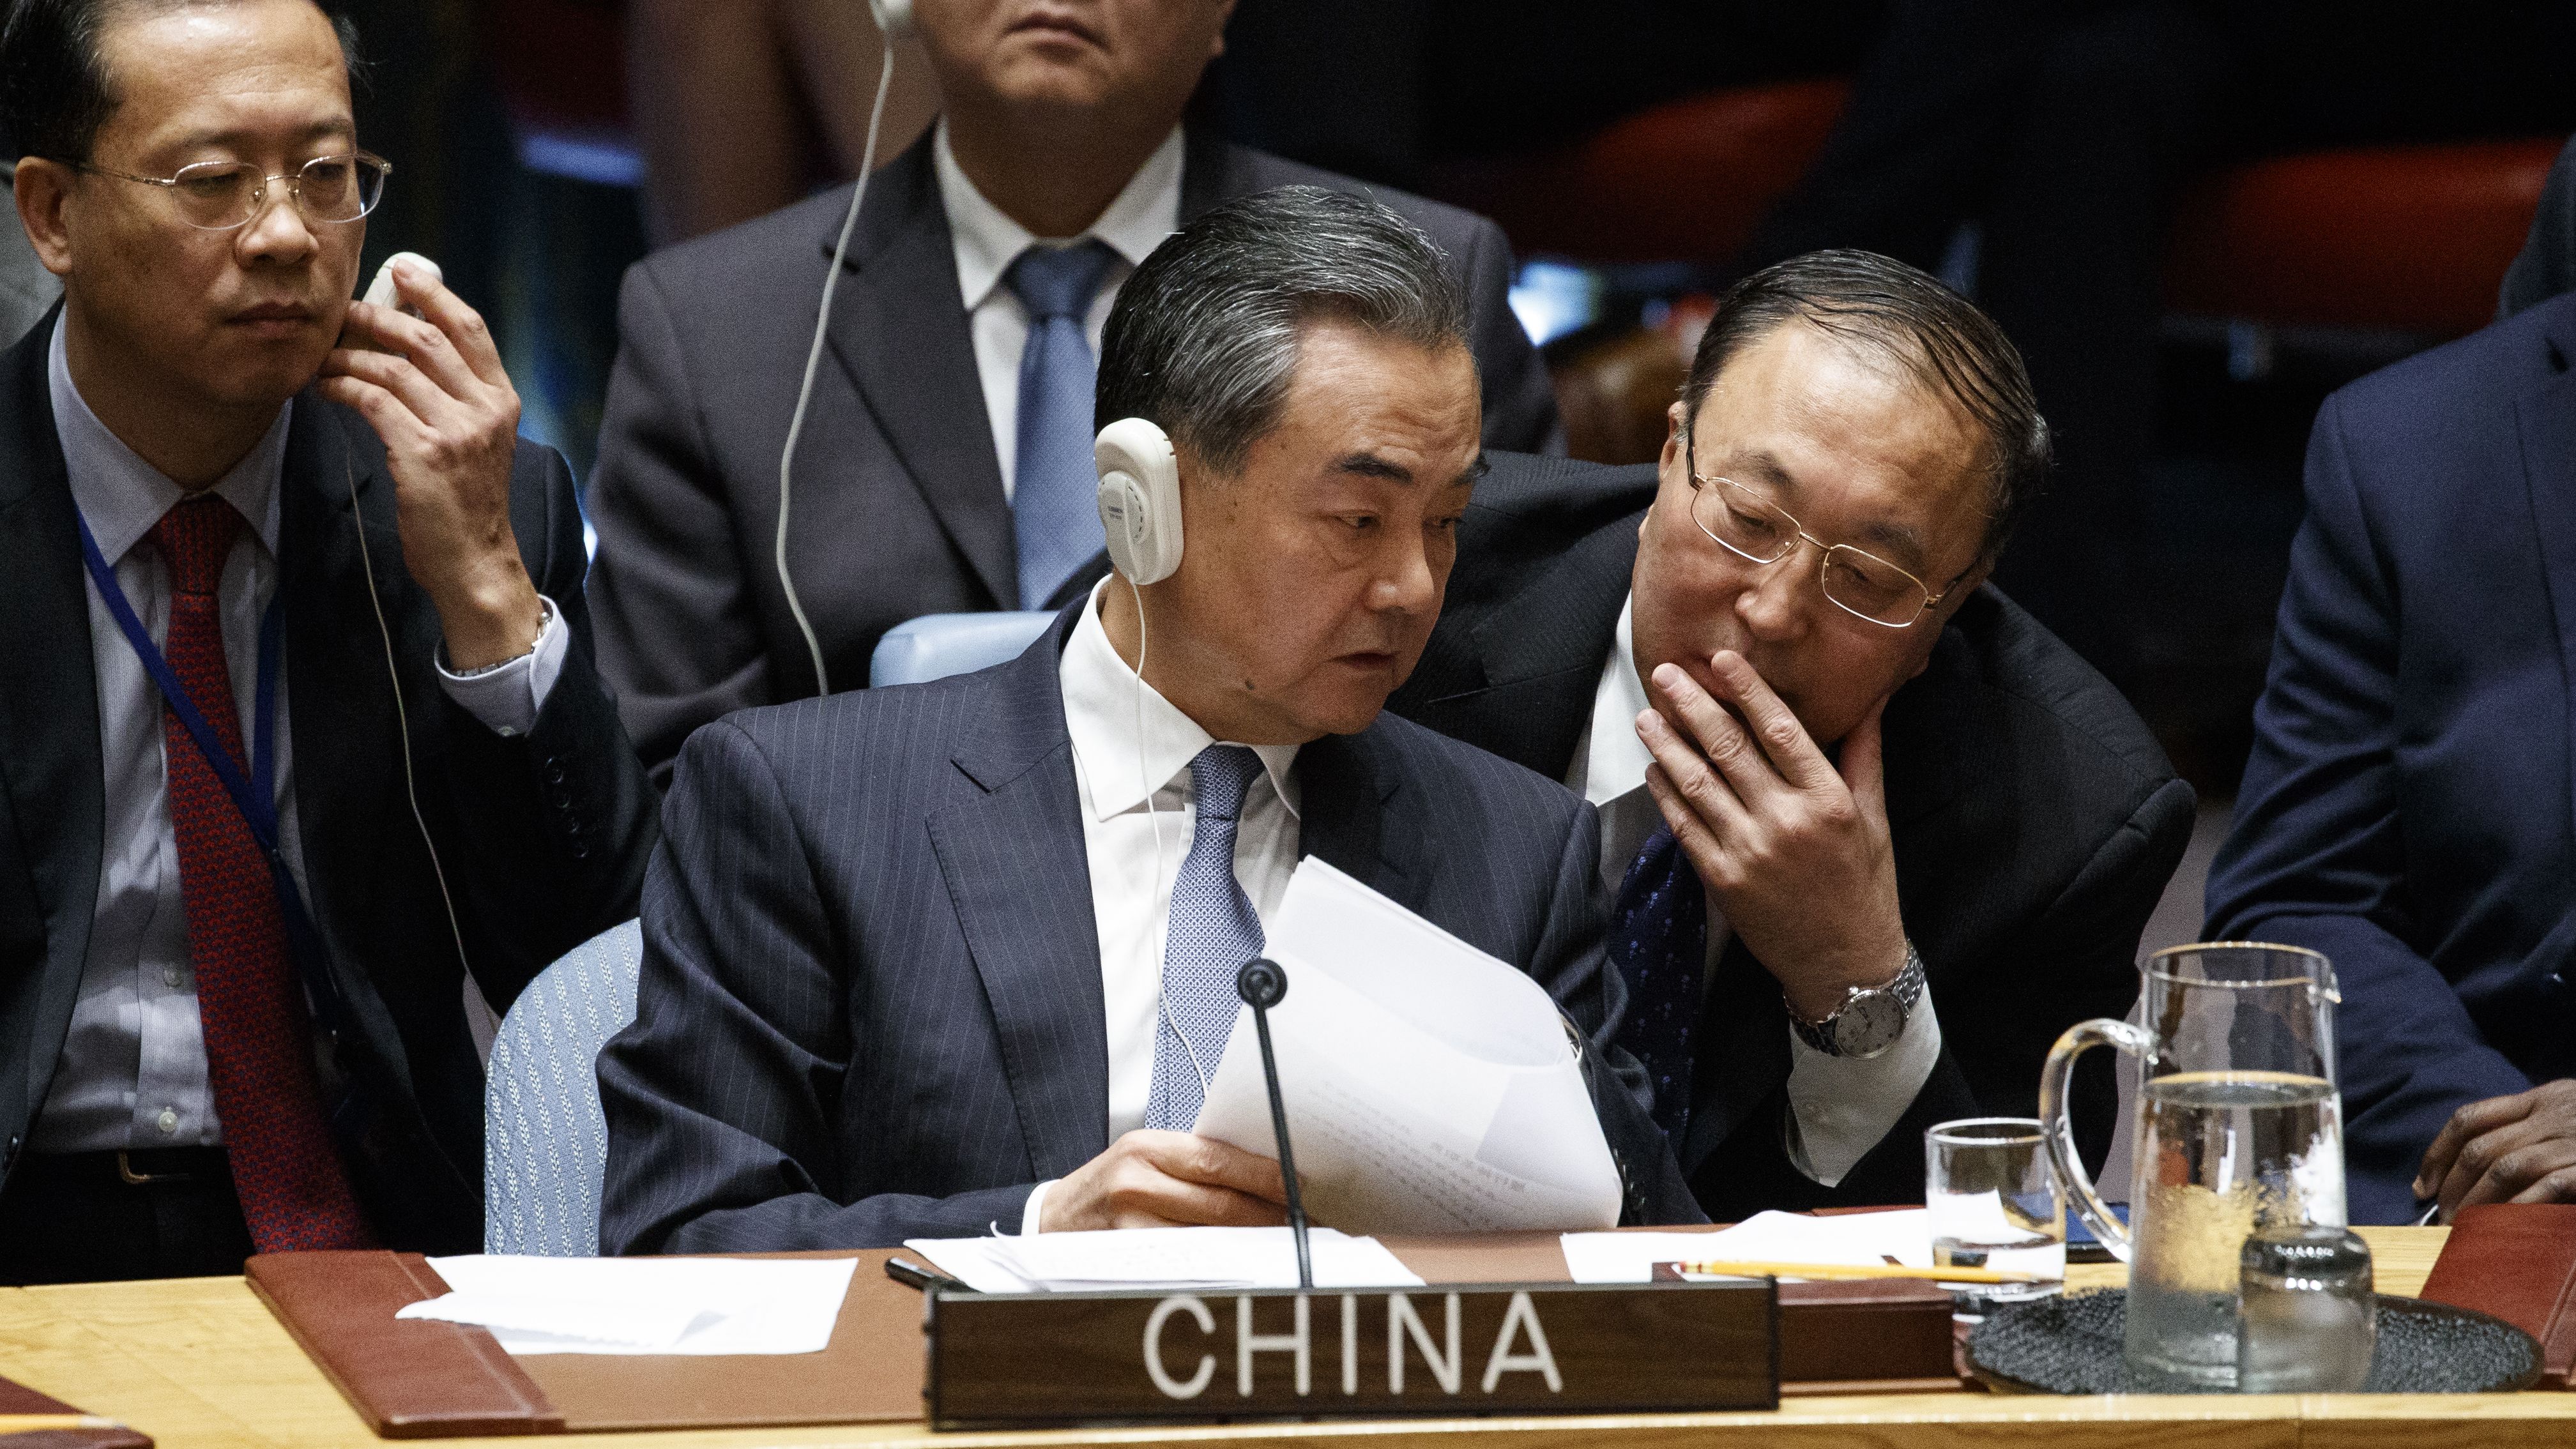 Chinese Foreign Minister Wang Yi speaks during the Security Council briefing on Wednesday.